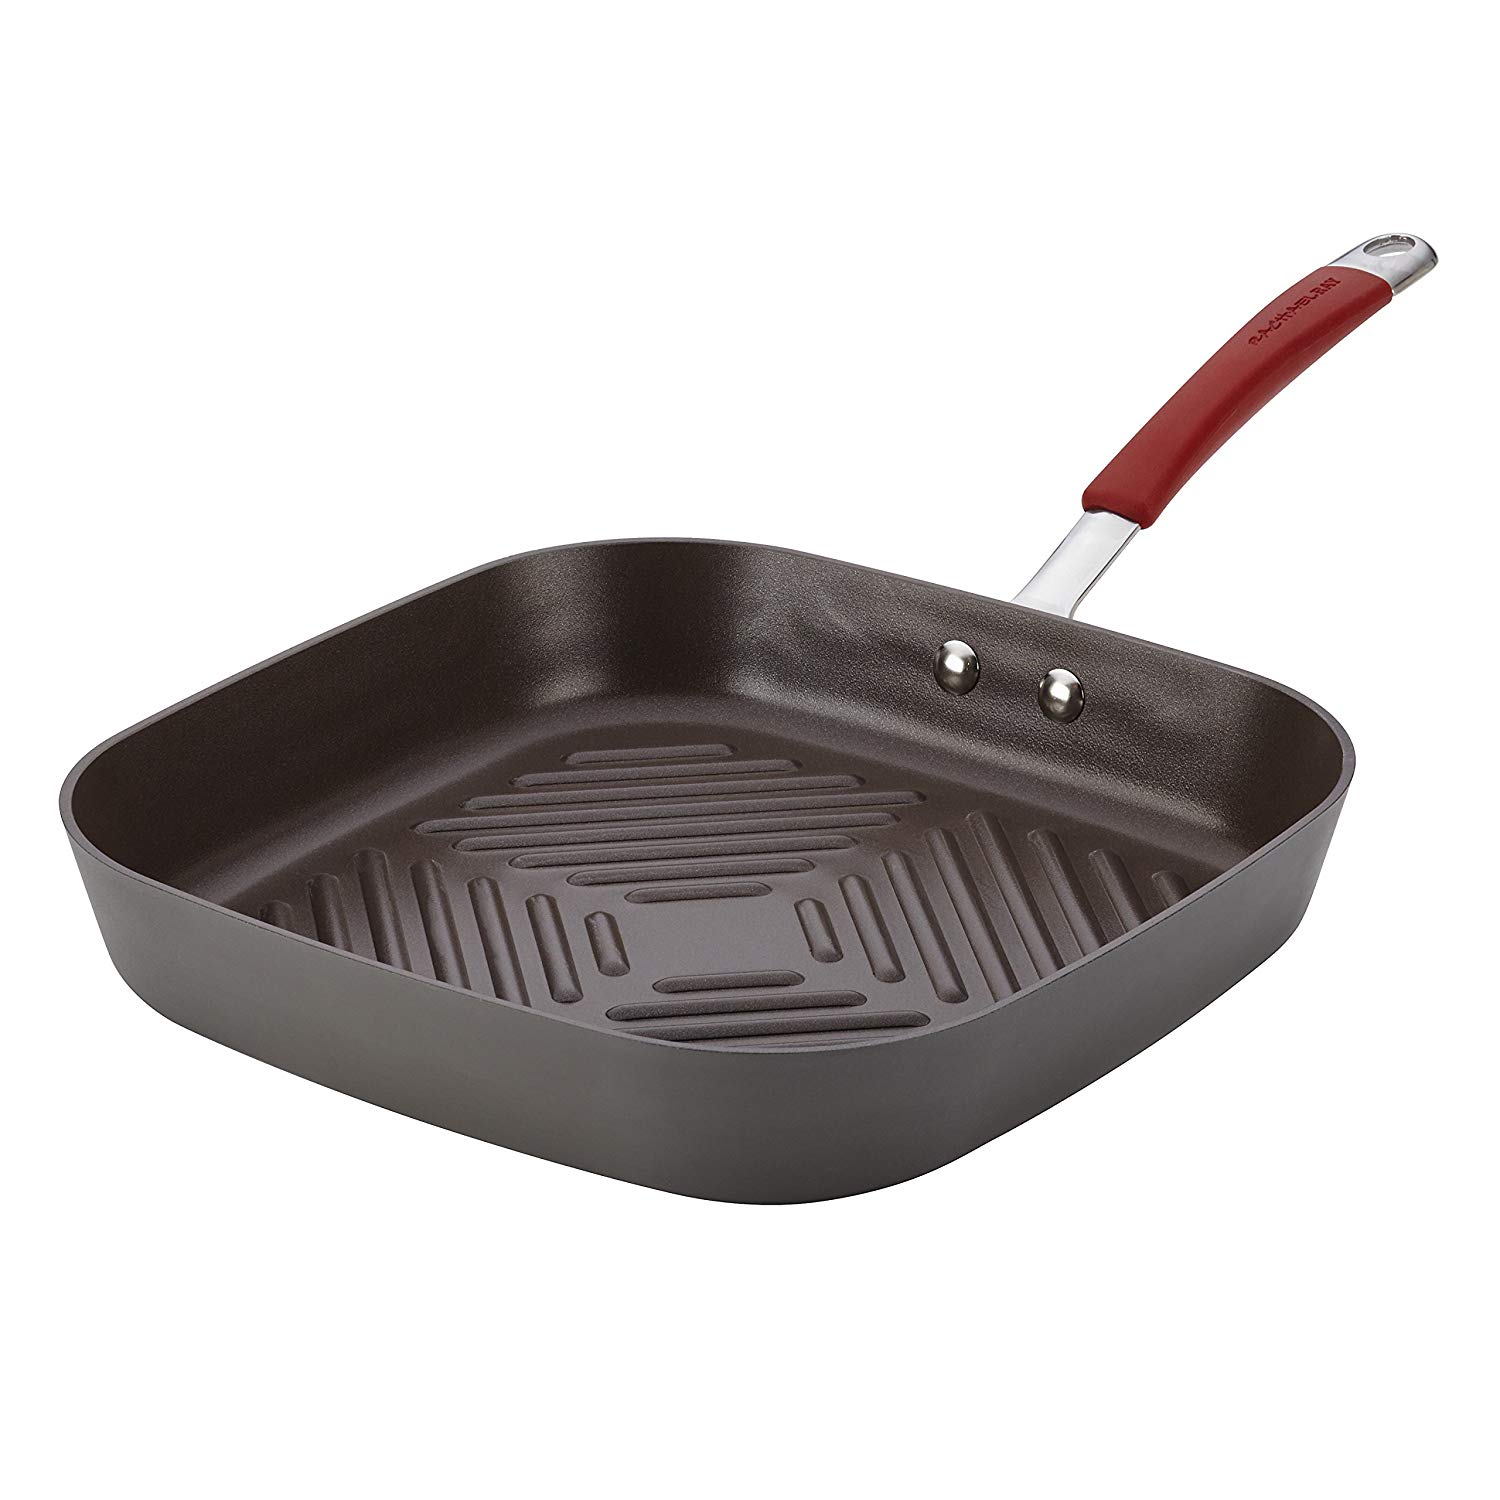 Rachael Ray Silicone Grip Nonstick Grill Pan, 11-Inch